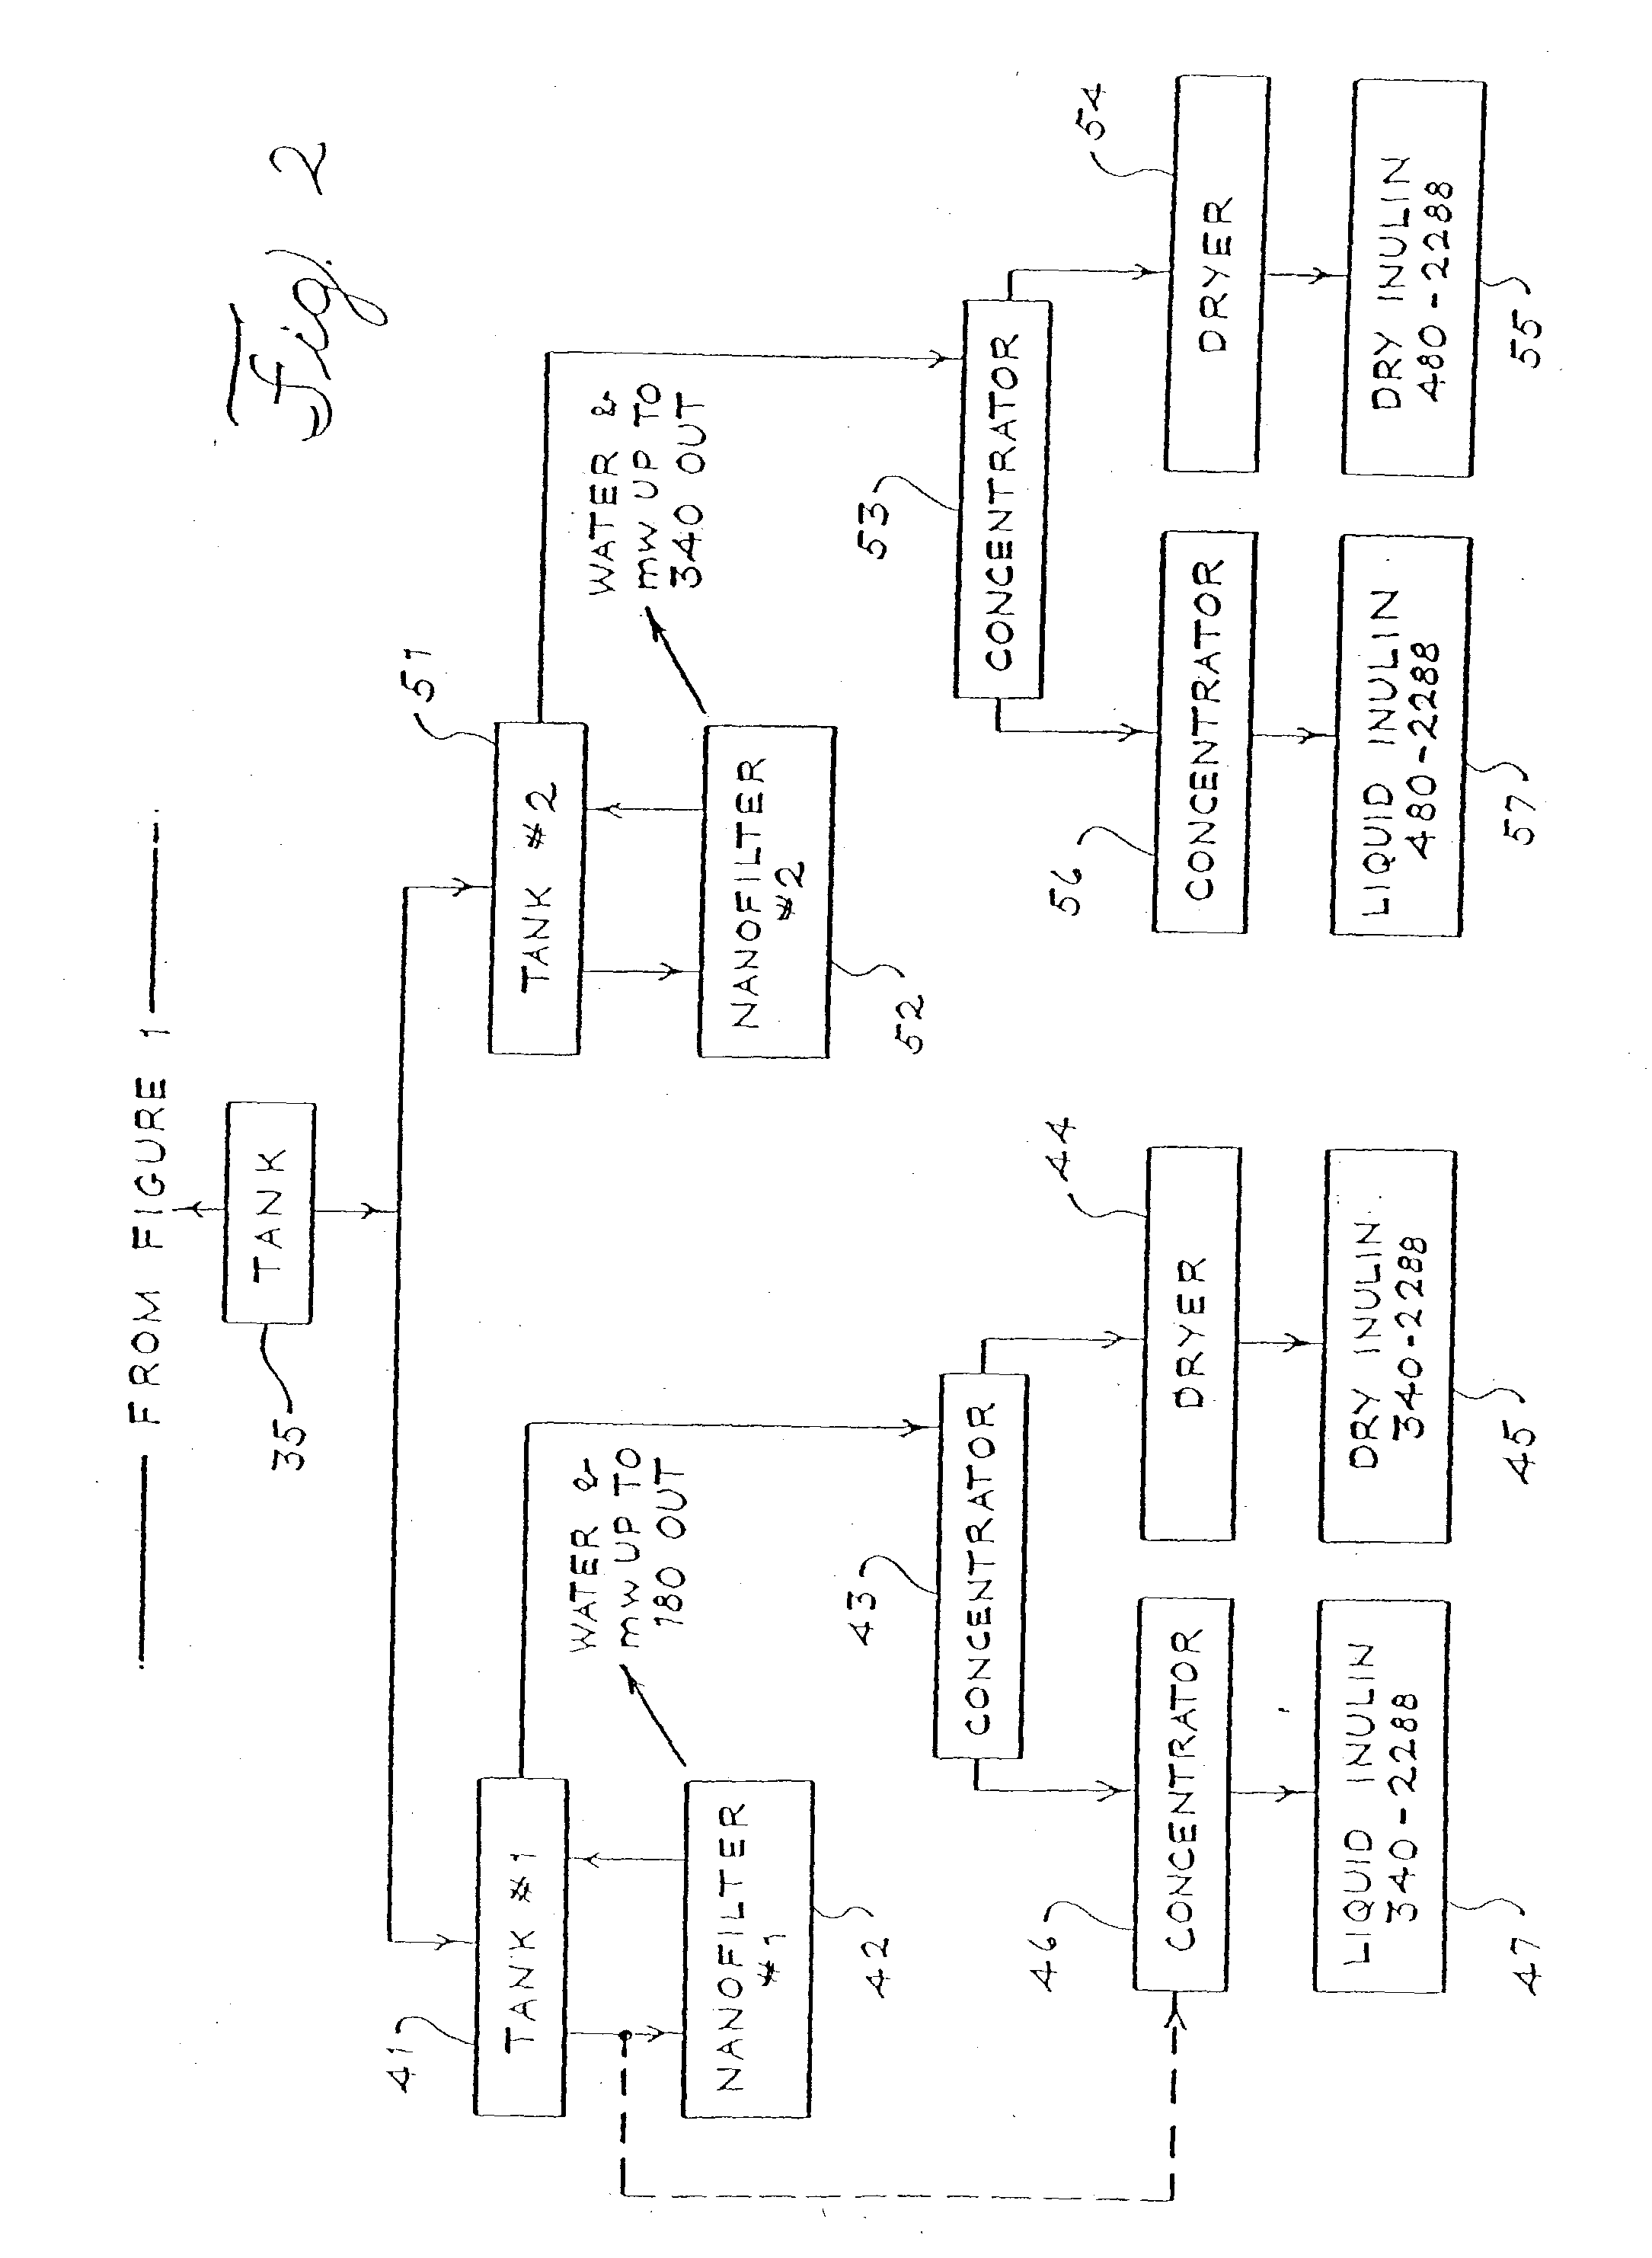 Sweetener compositions containing fractions of inulin